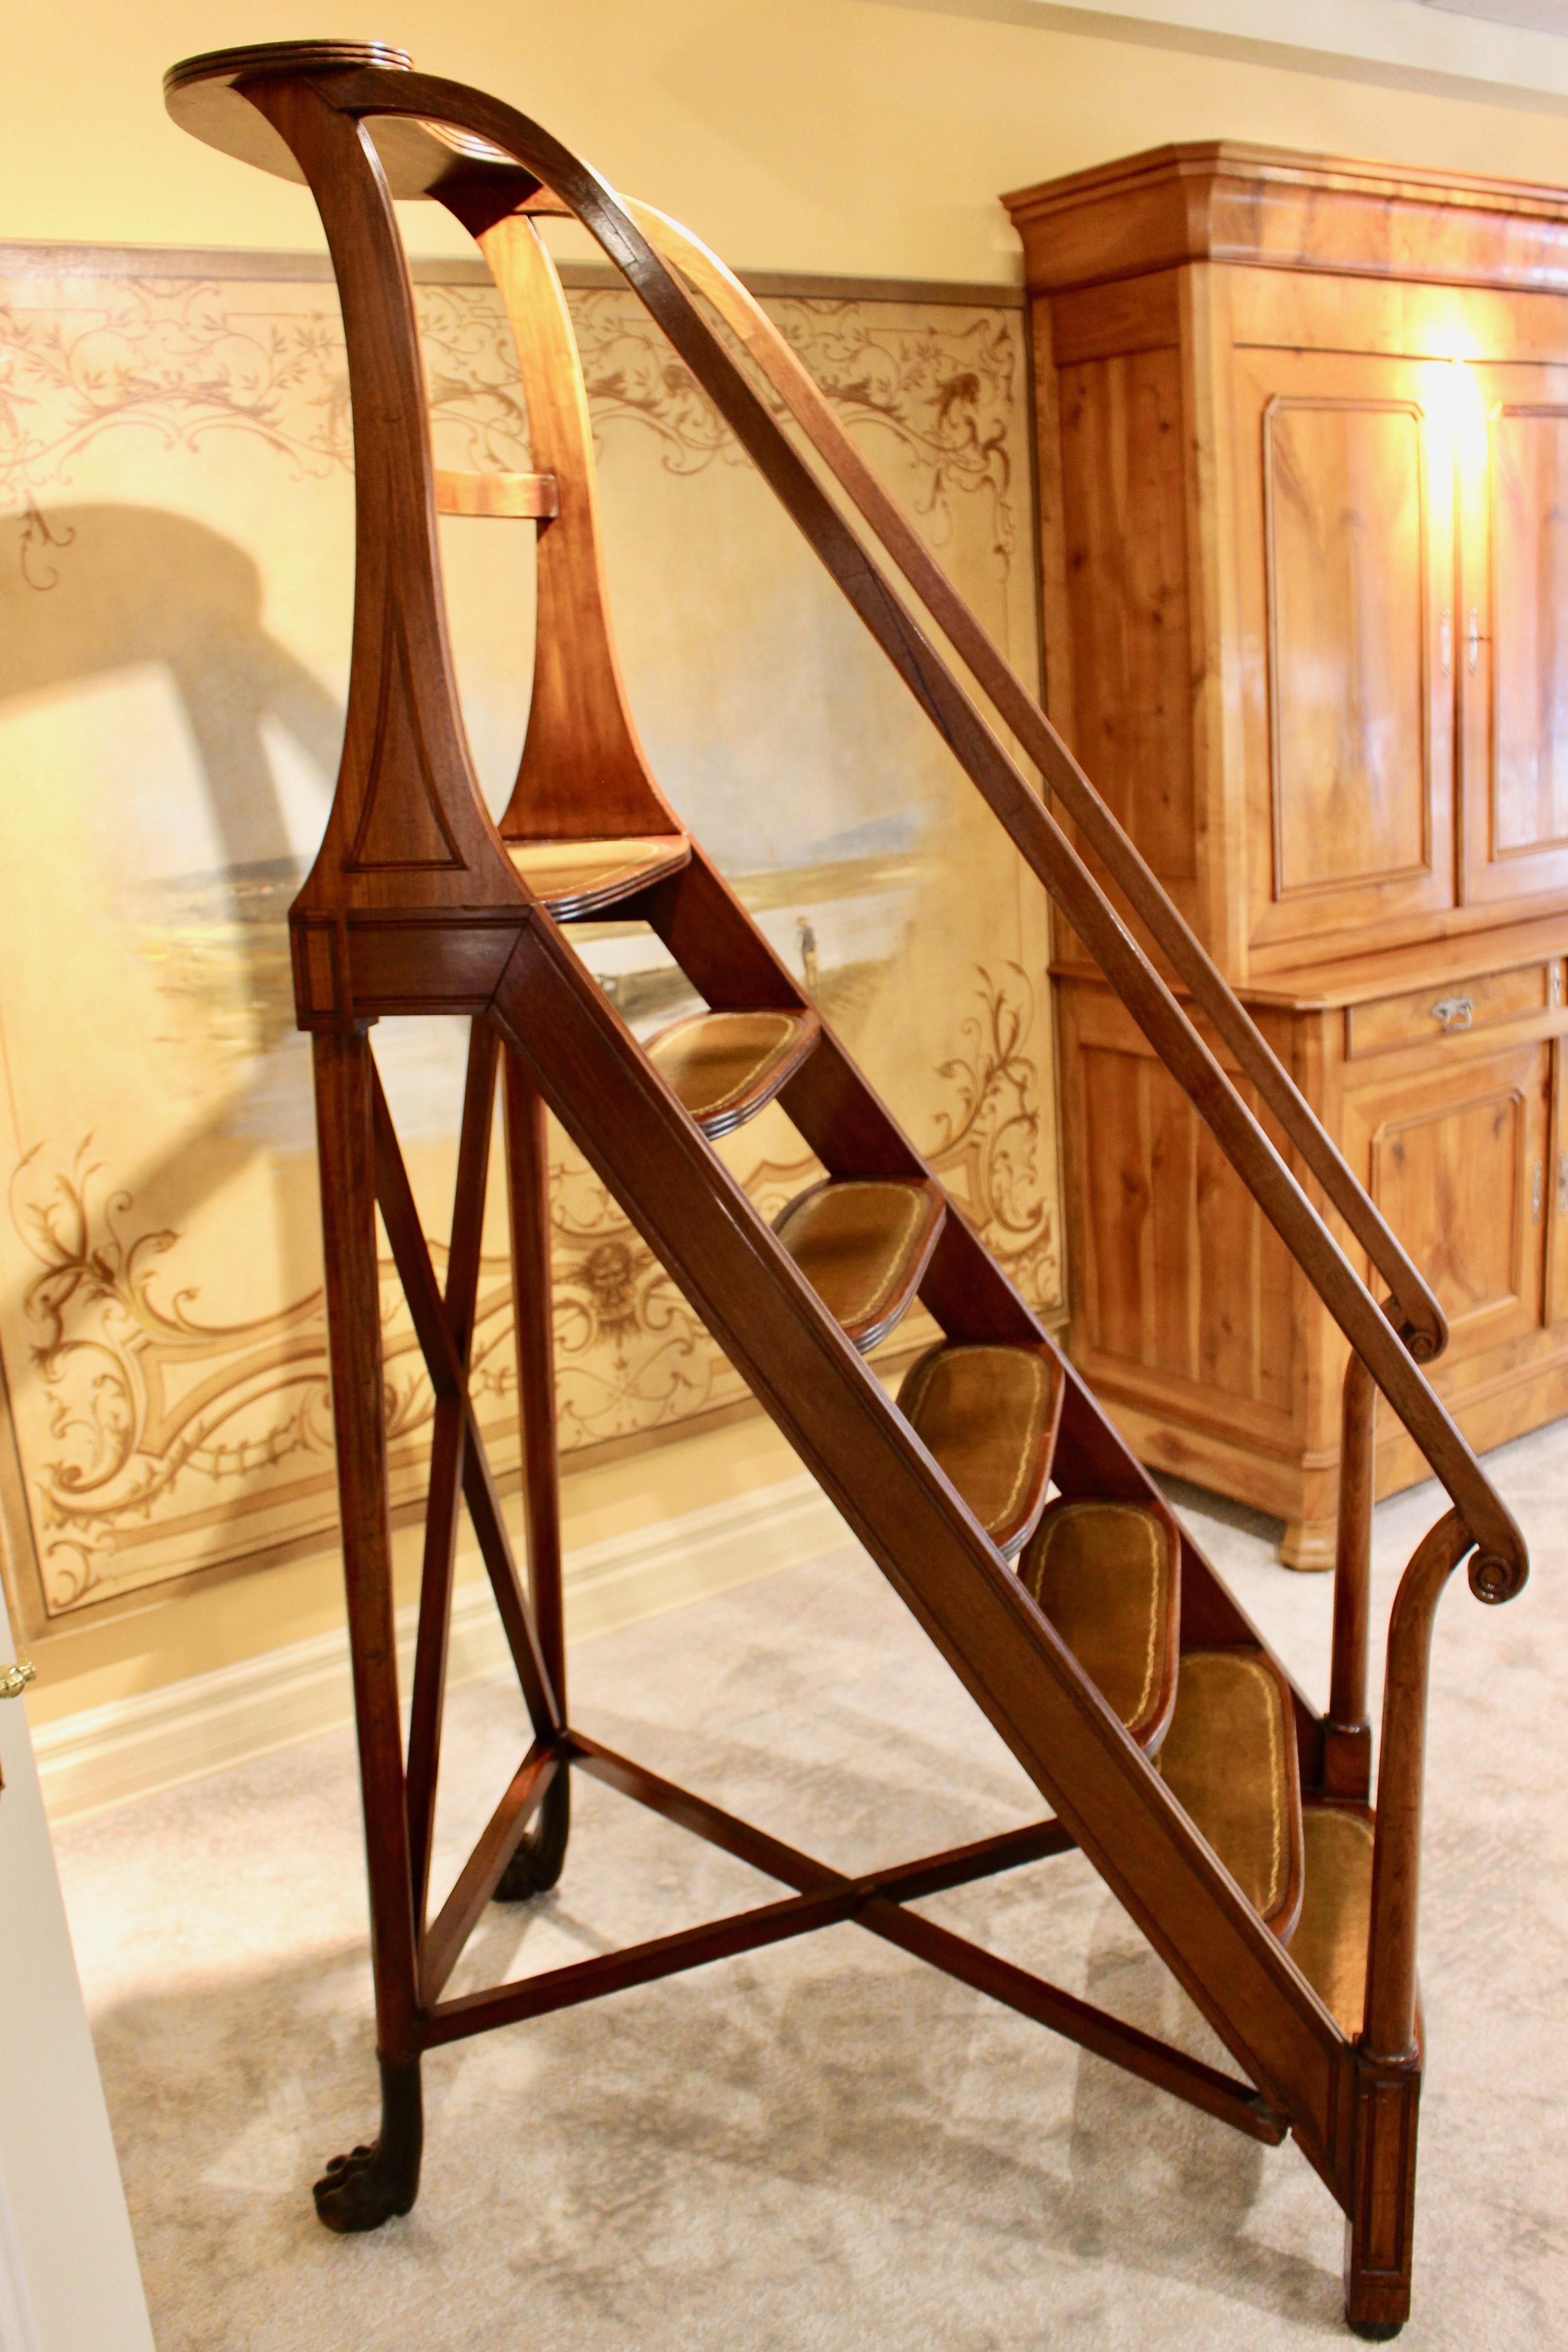 A fine set of Regency mahogany library steps, first quarter of the 19th century. Measures: 6' 11